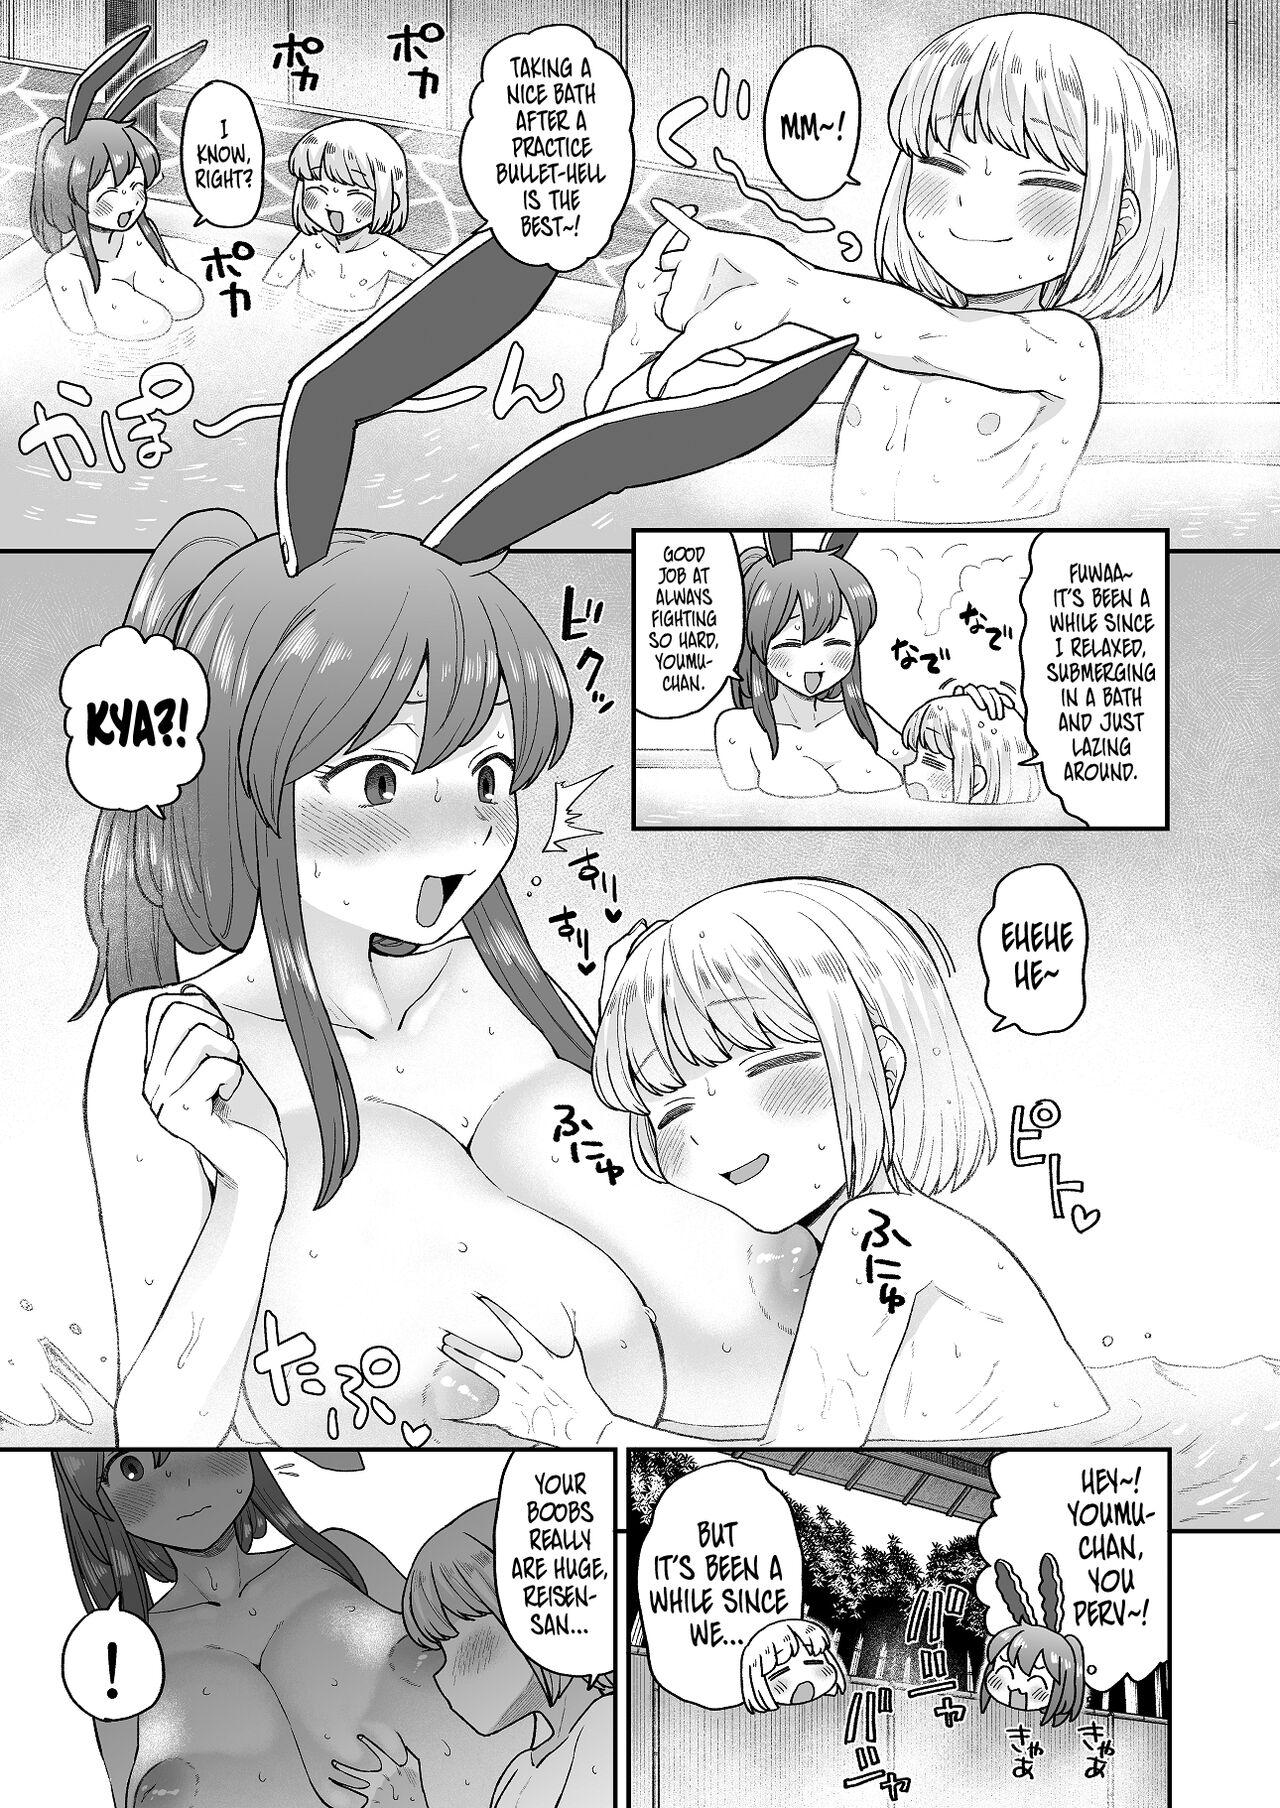 Cunt Ofuro ni Hairou! | Let's Take a Bath! - Touhou project Soapy Massage - Page 5